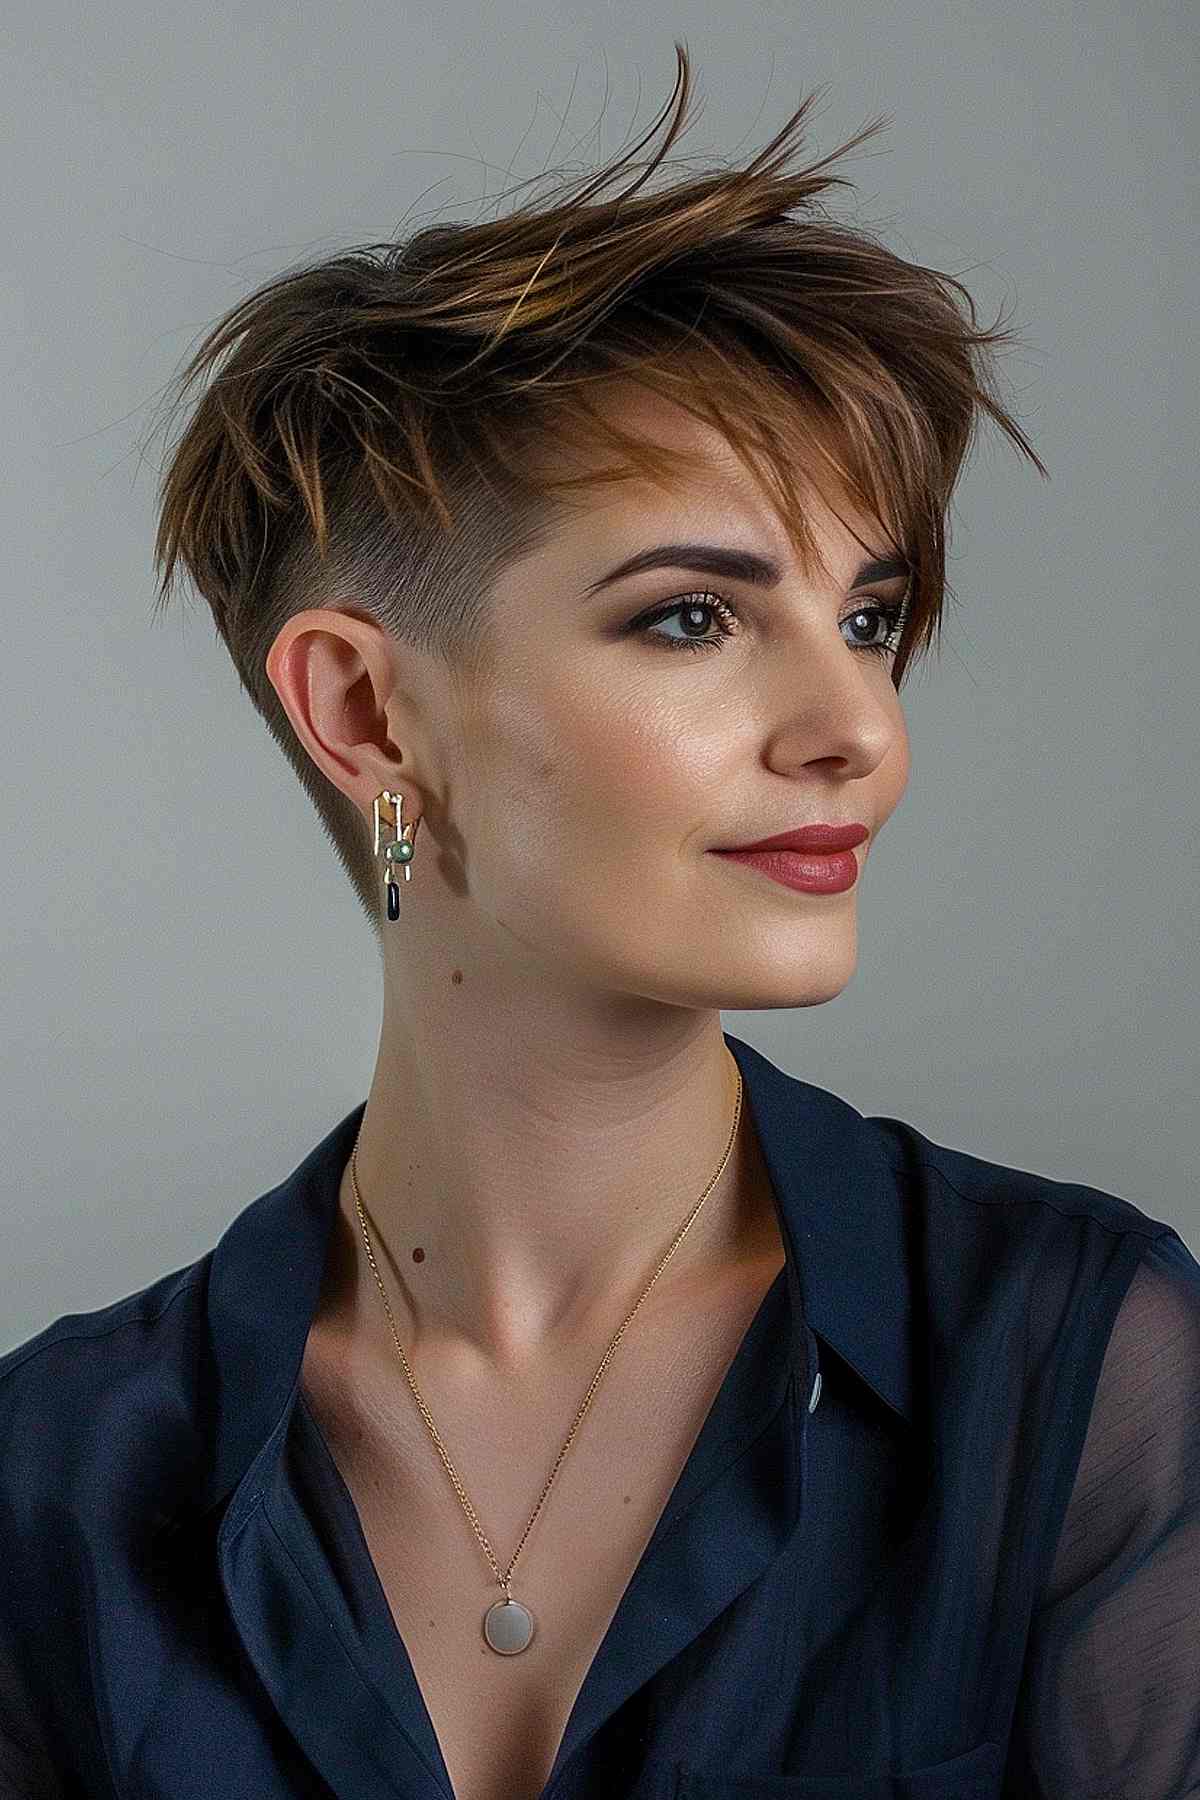 Young woman with a stylish undercut feathered pixie haircut, featuring longer, textured layers on top and shaven sides, accentuated with subtle highlights.